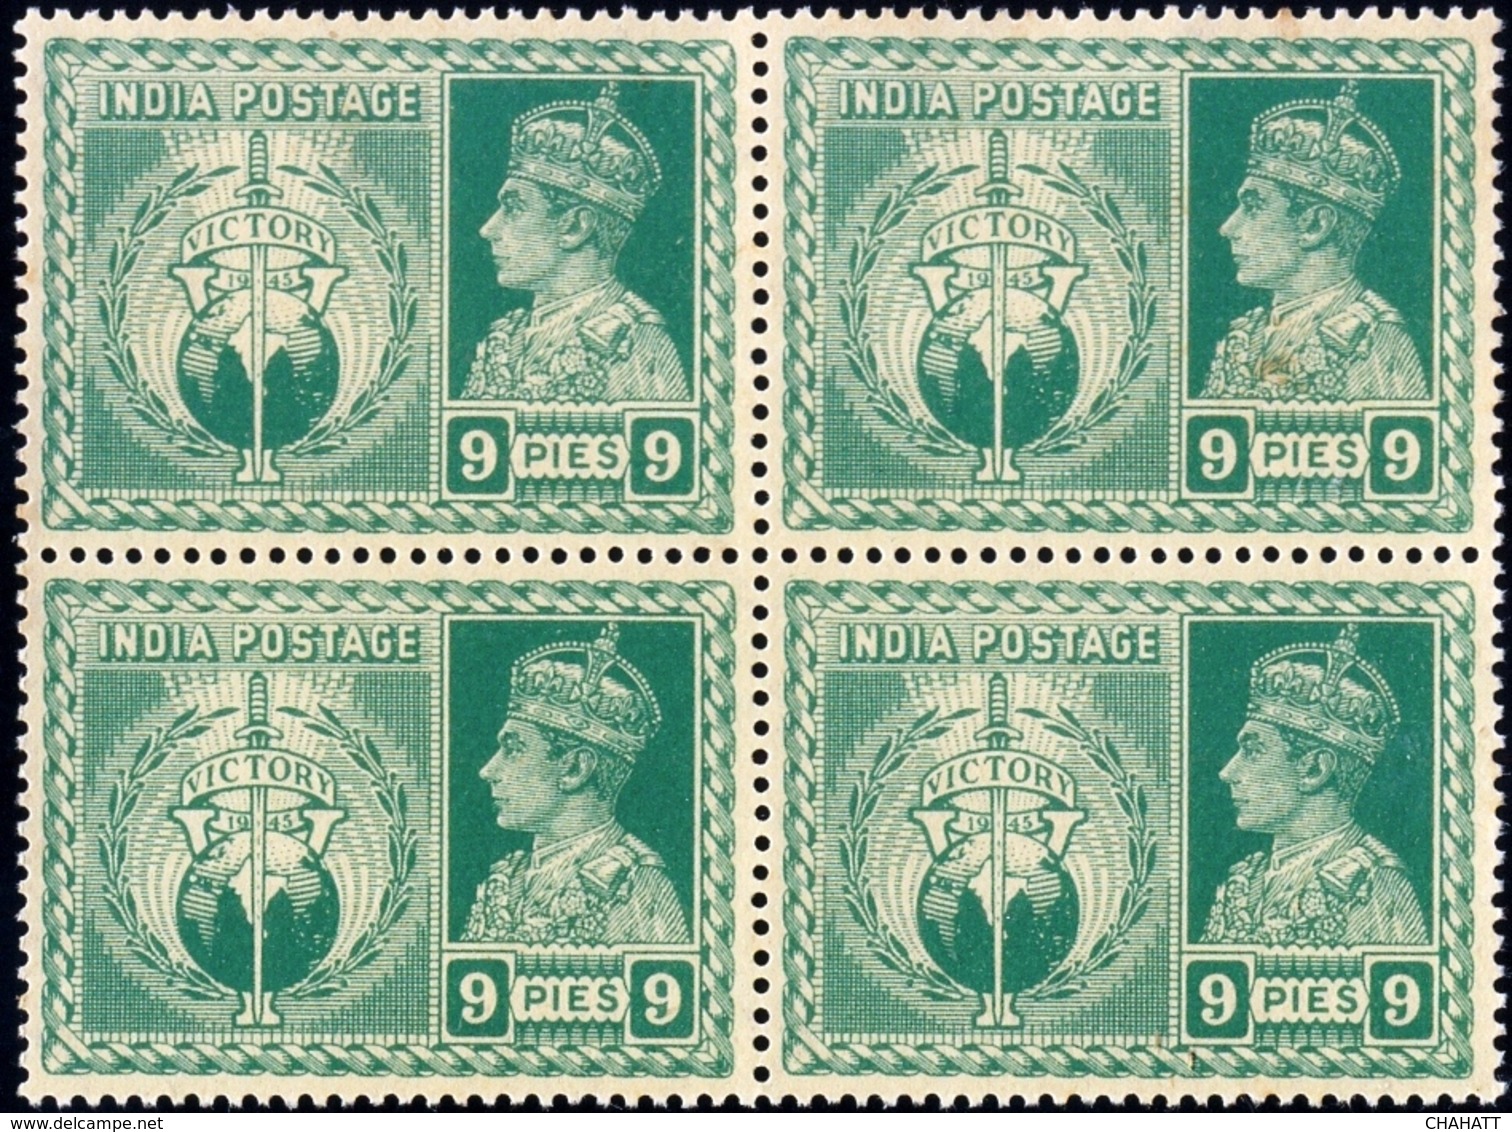 BRITISH INDIA- PRE DECIMAL-VICTORY OF ALLIED POERS IN WW-II-FULL SET OF 4- BLOCKS OF 4-INDIA-1946-SCARCE-MNH-TP-666 - Nuevos